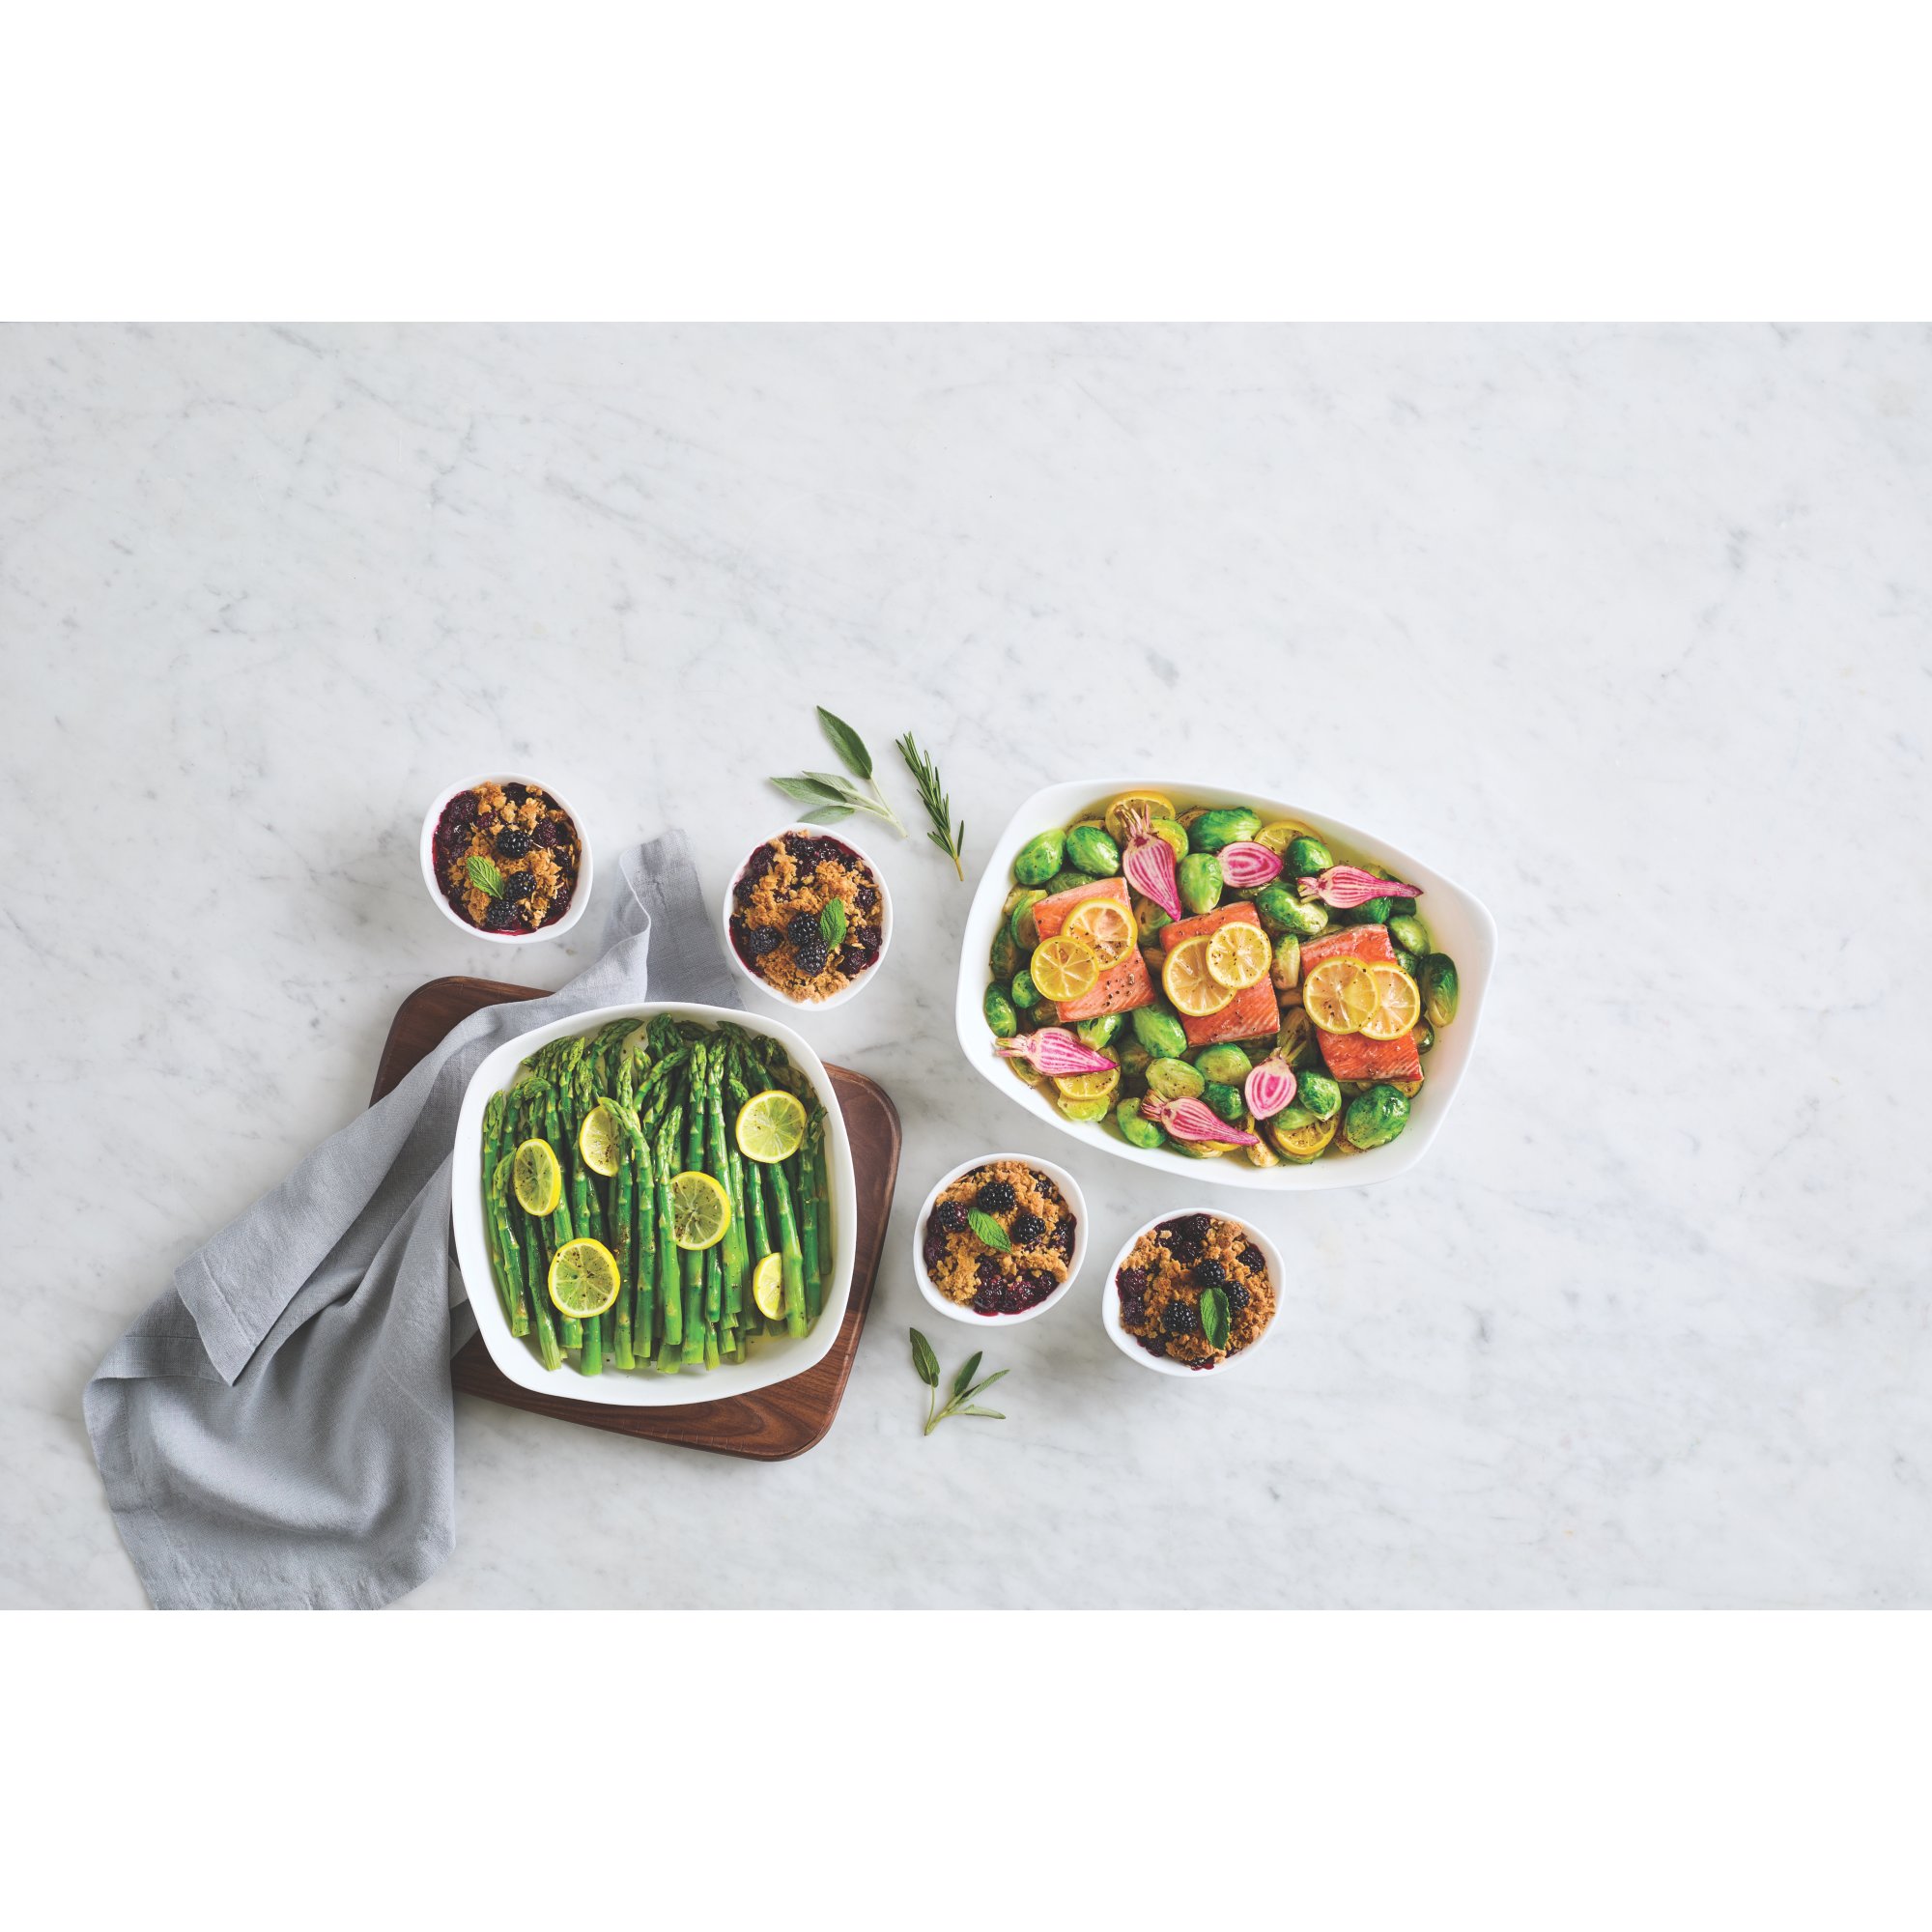 Rubbermaid's New Duralite Bakeware Line Is at